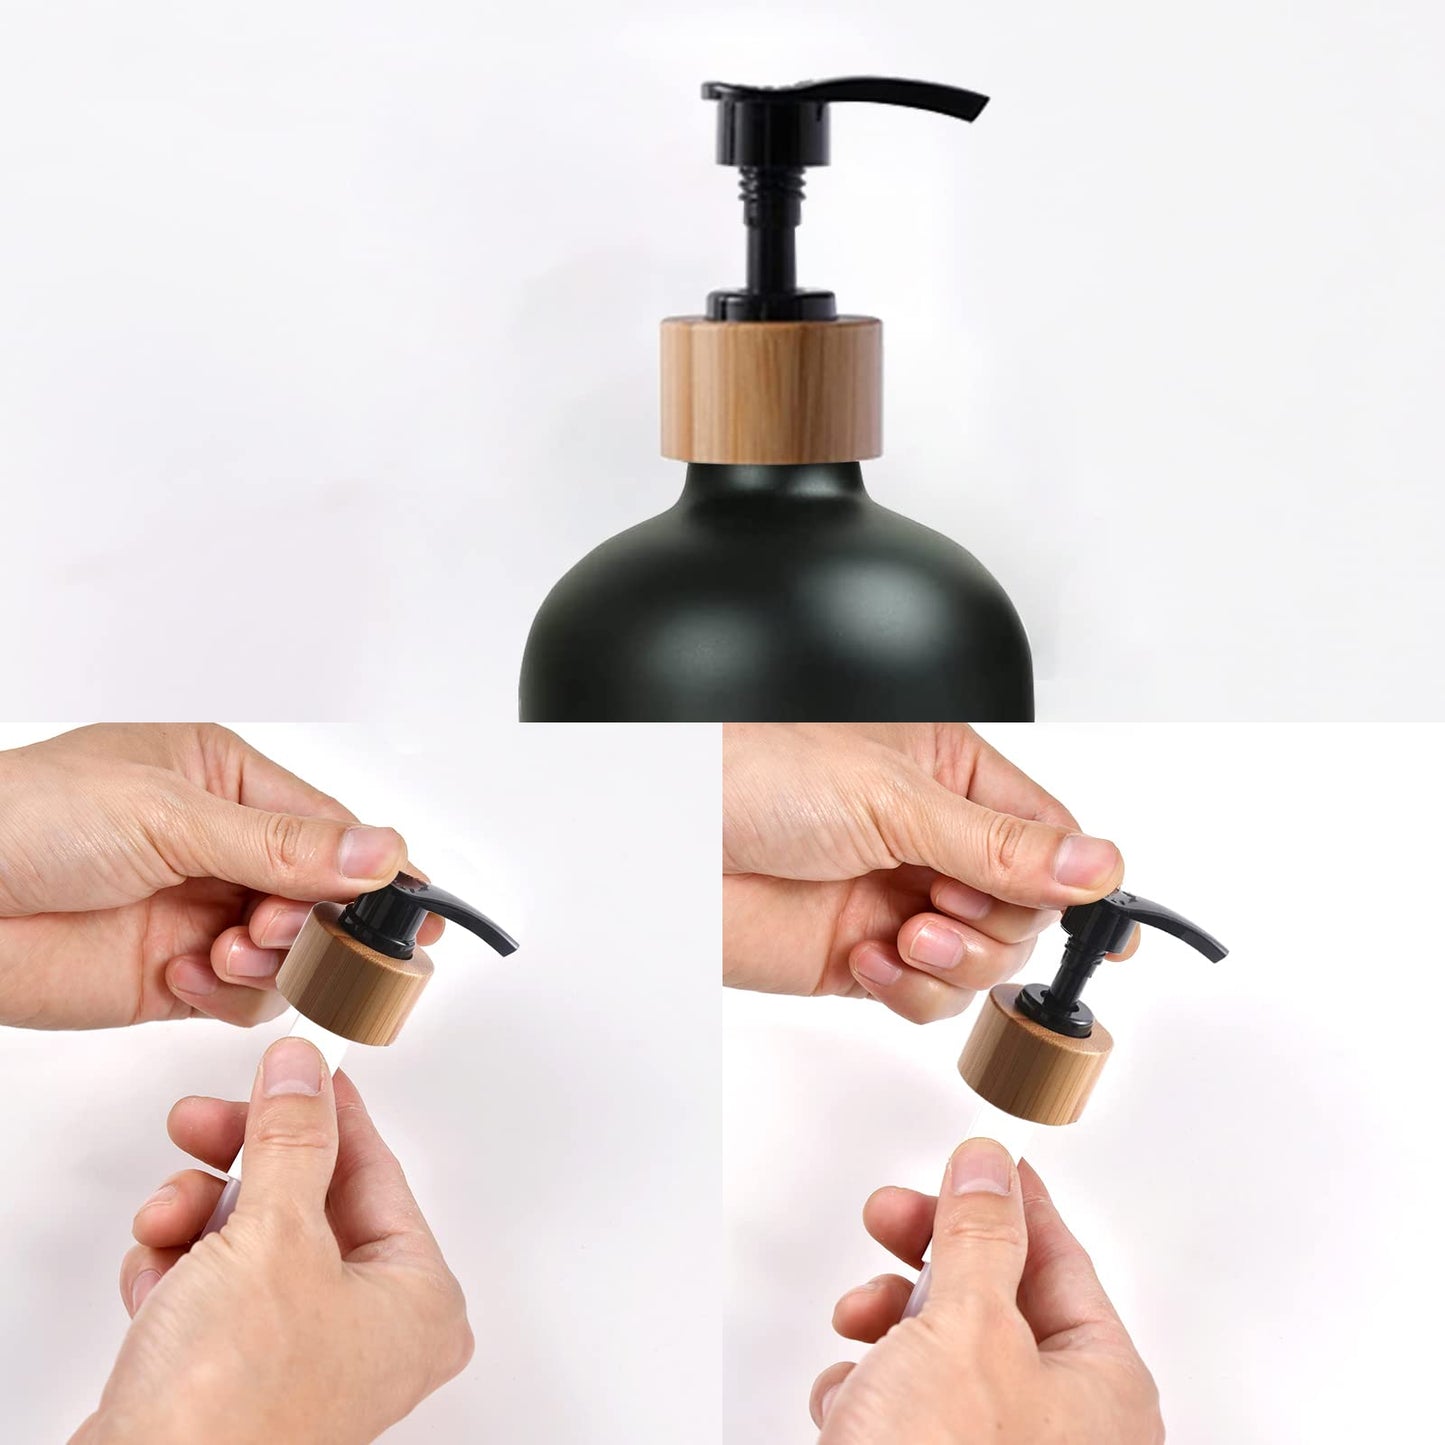 Dish Soap Bottle with Bamboo Pump